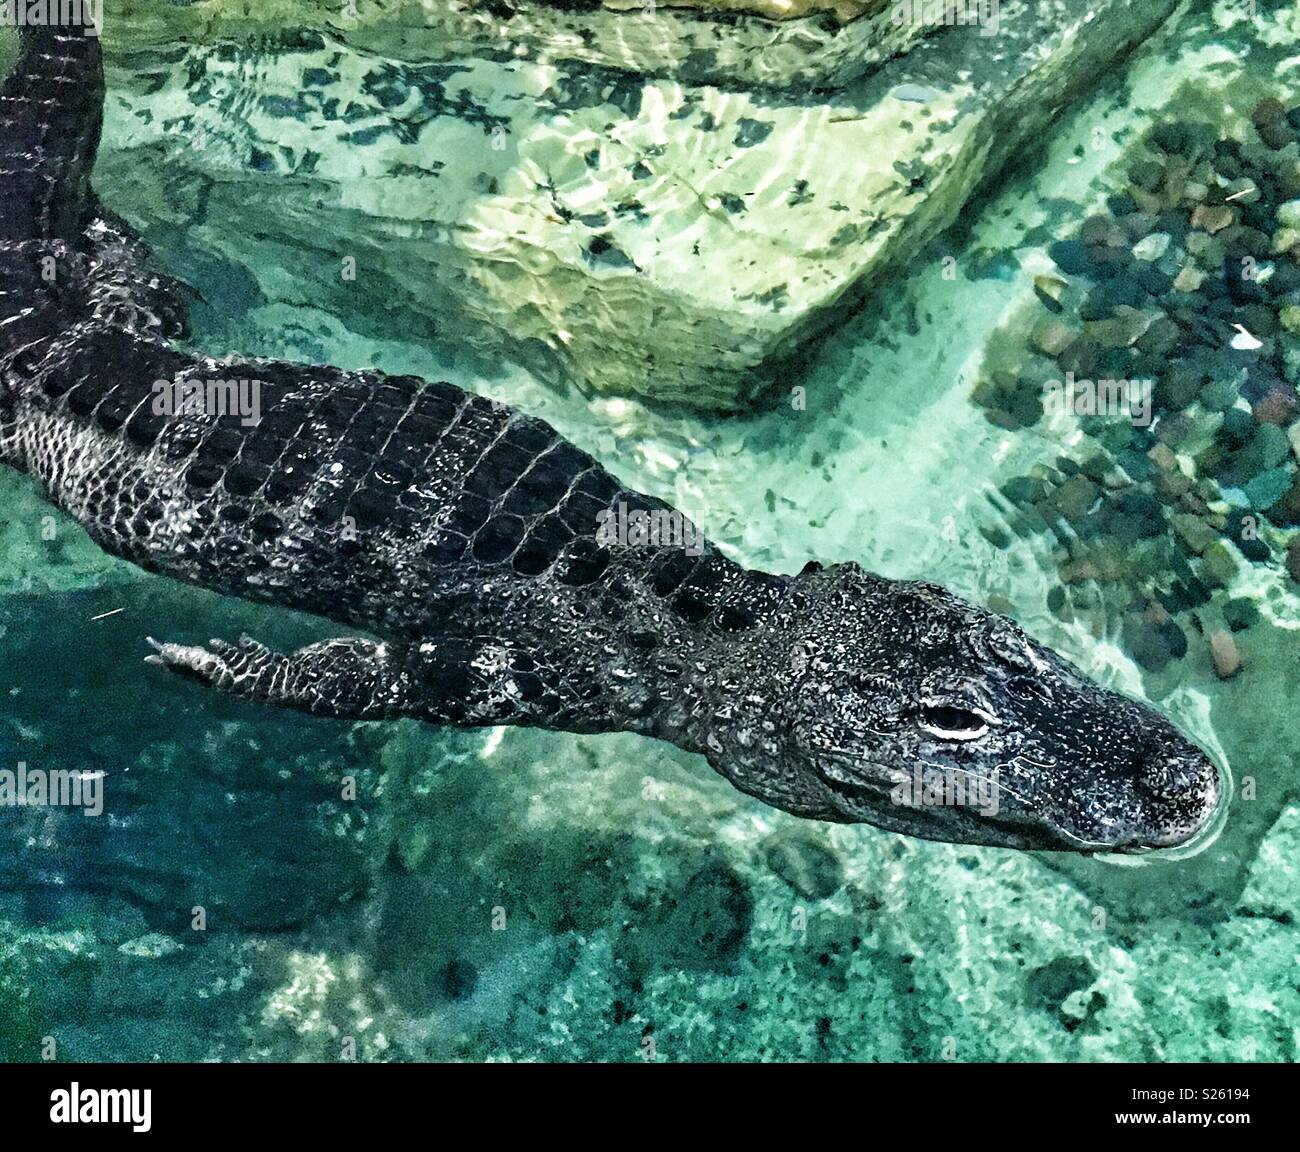 Chinese alligator swimming in pool Stock Photo